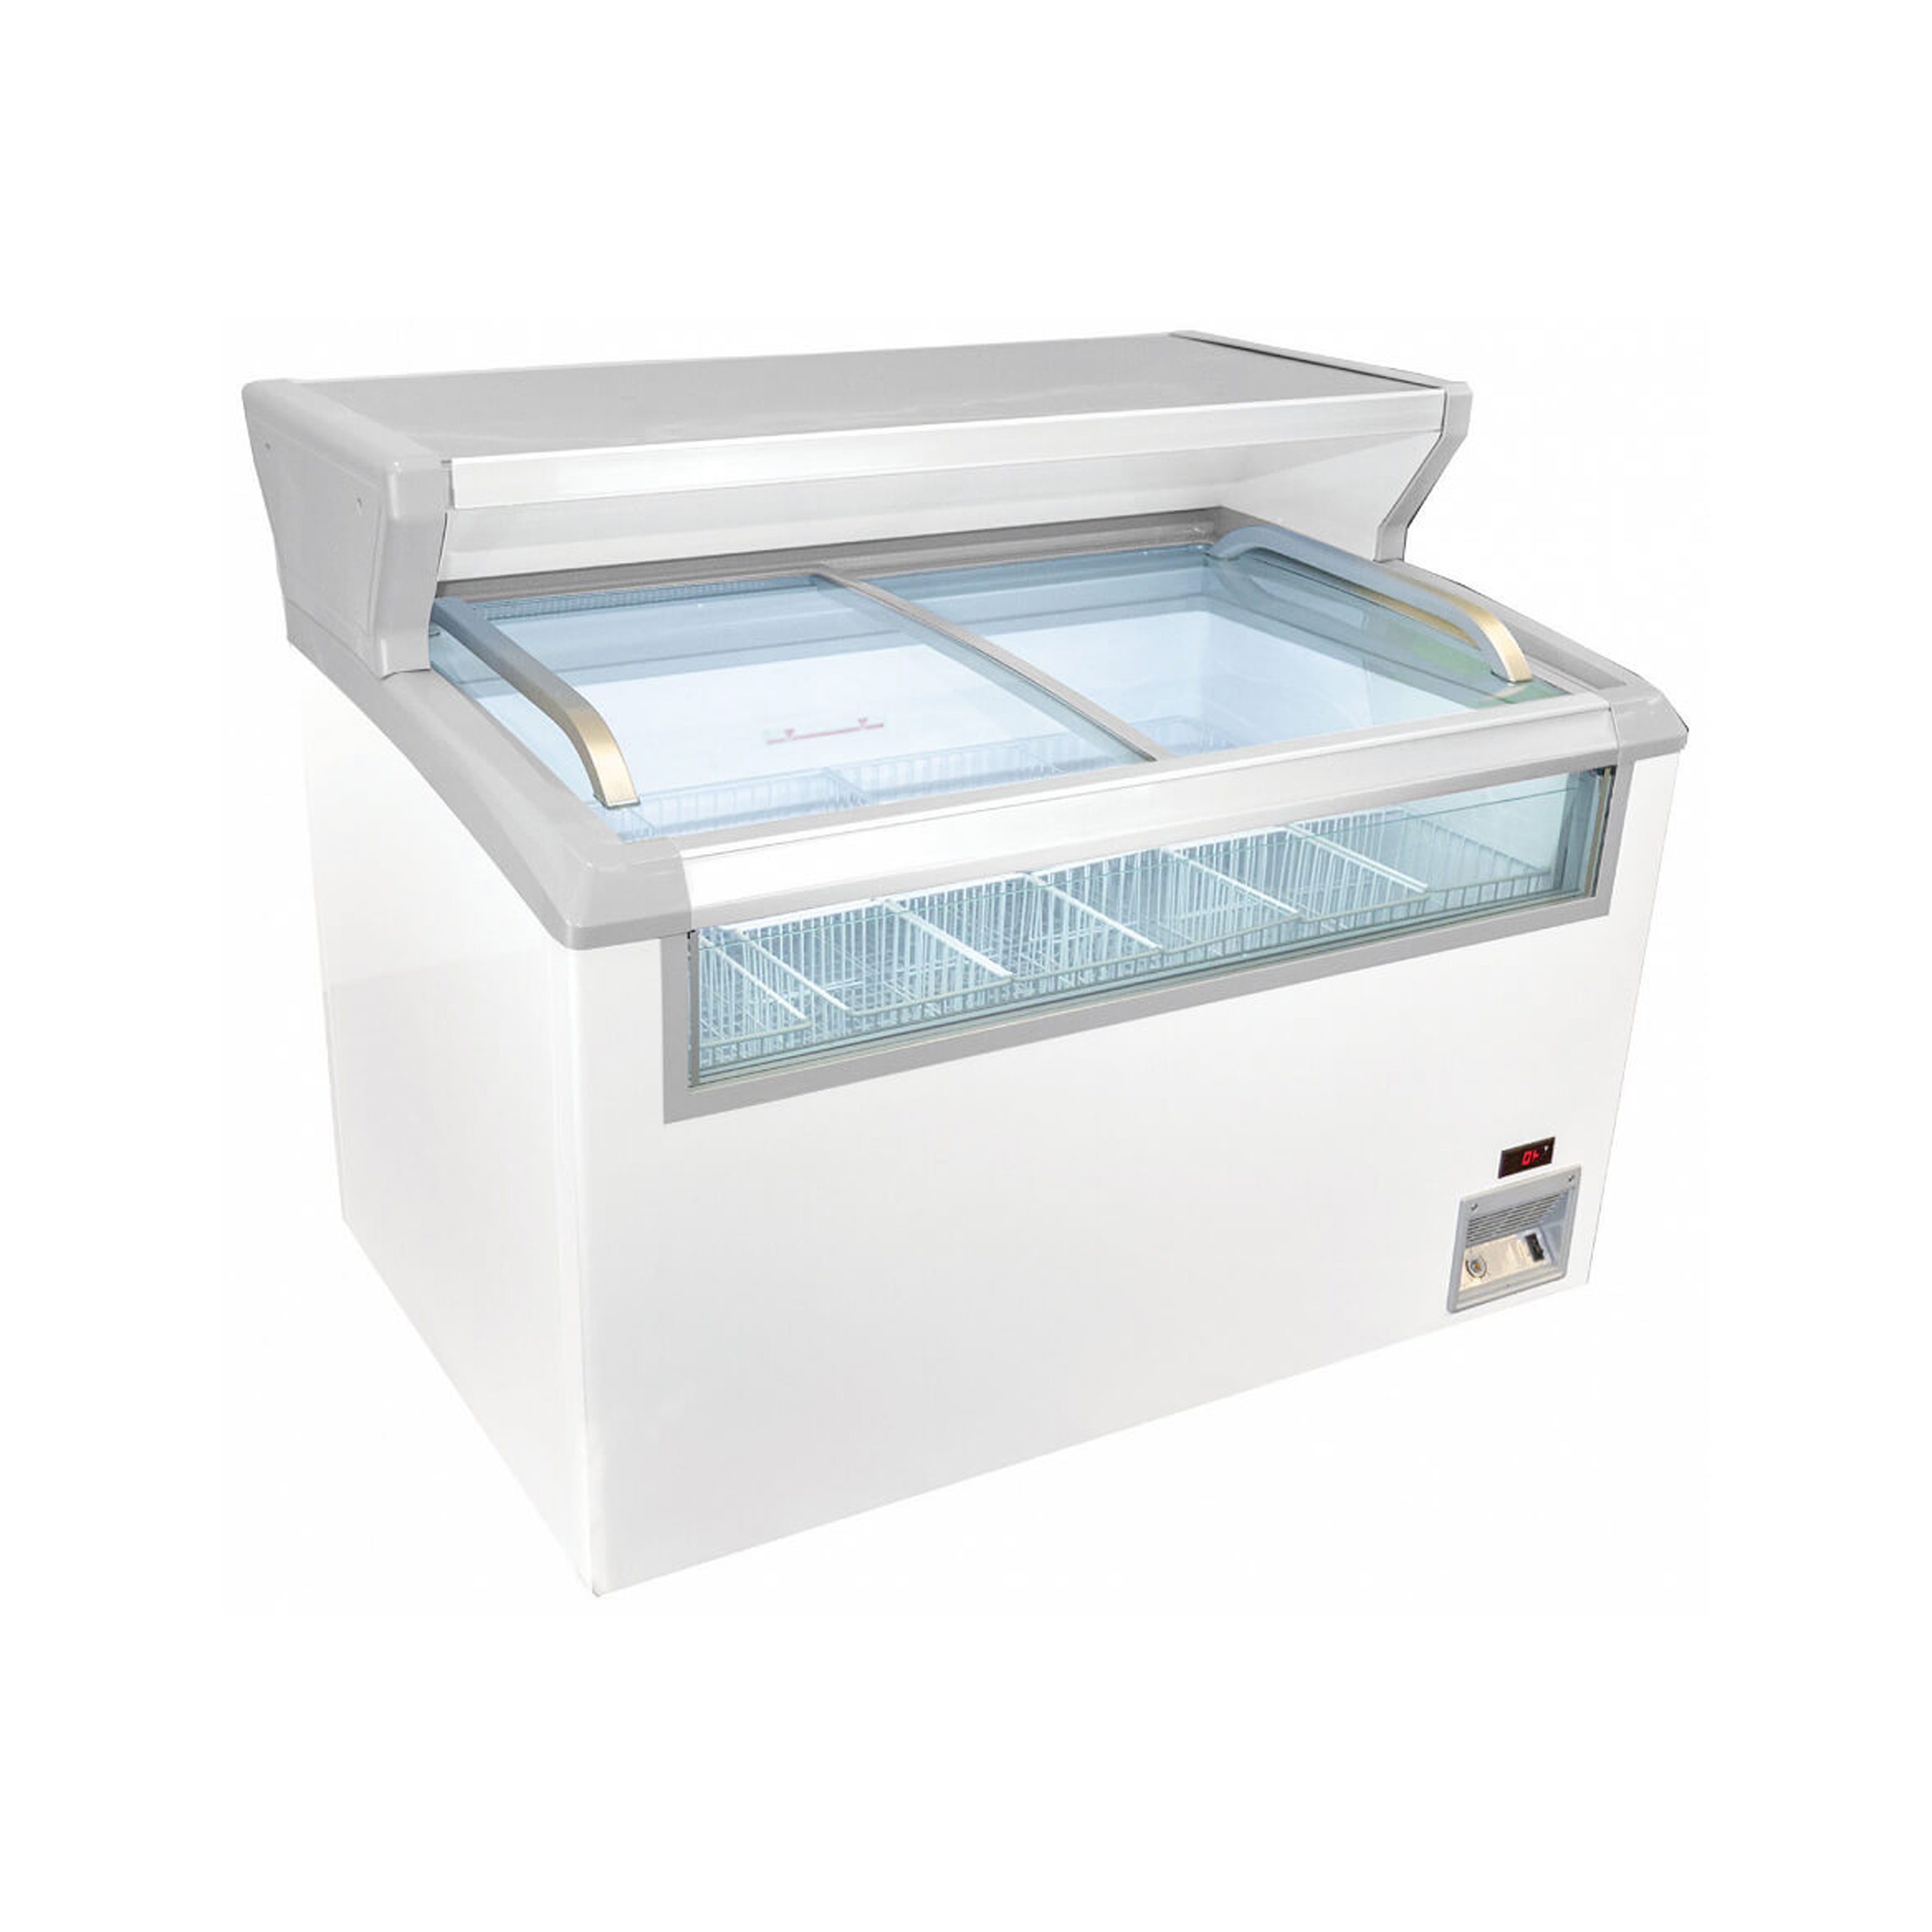 Excellence Industries - MCT-6HC, 73" Commercial Curved Top Display Freezer w/ Merchandising Shelf 21.2 cu. ft.